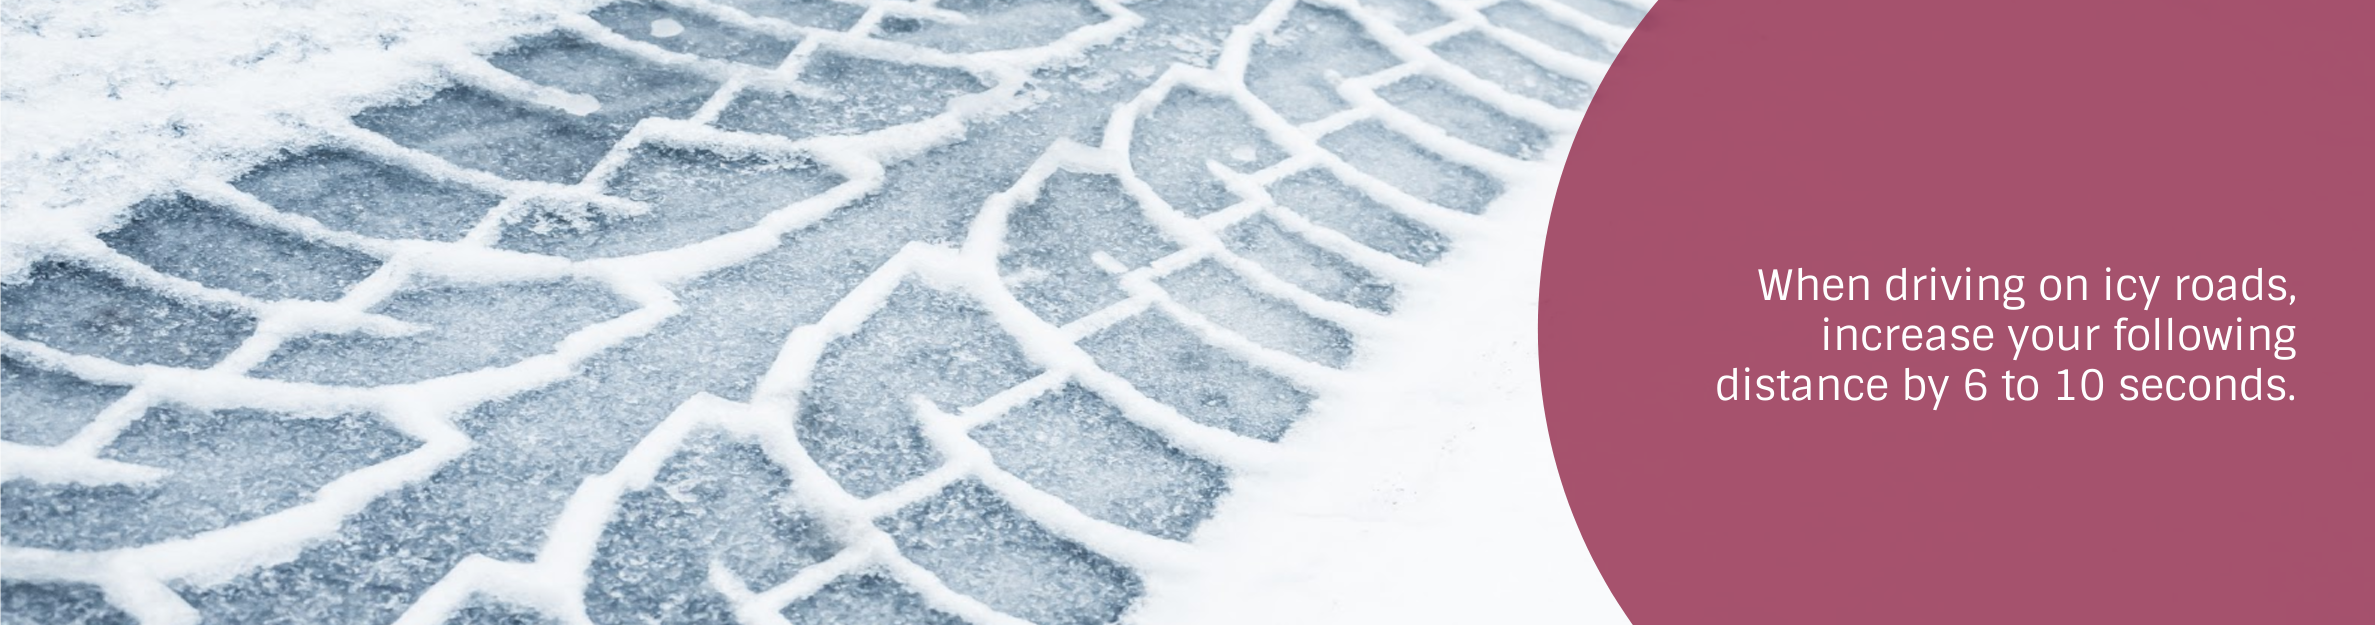 Photo: Snowy tire track
Text: When driving on icy roads, increase your following 
distance by 6 to 10 seconds.